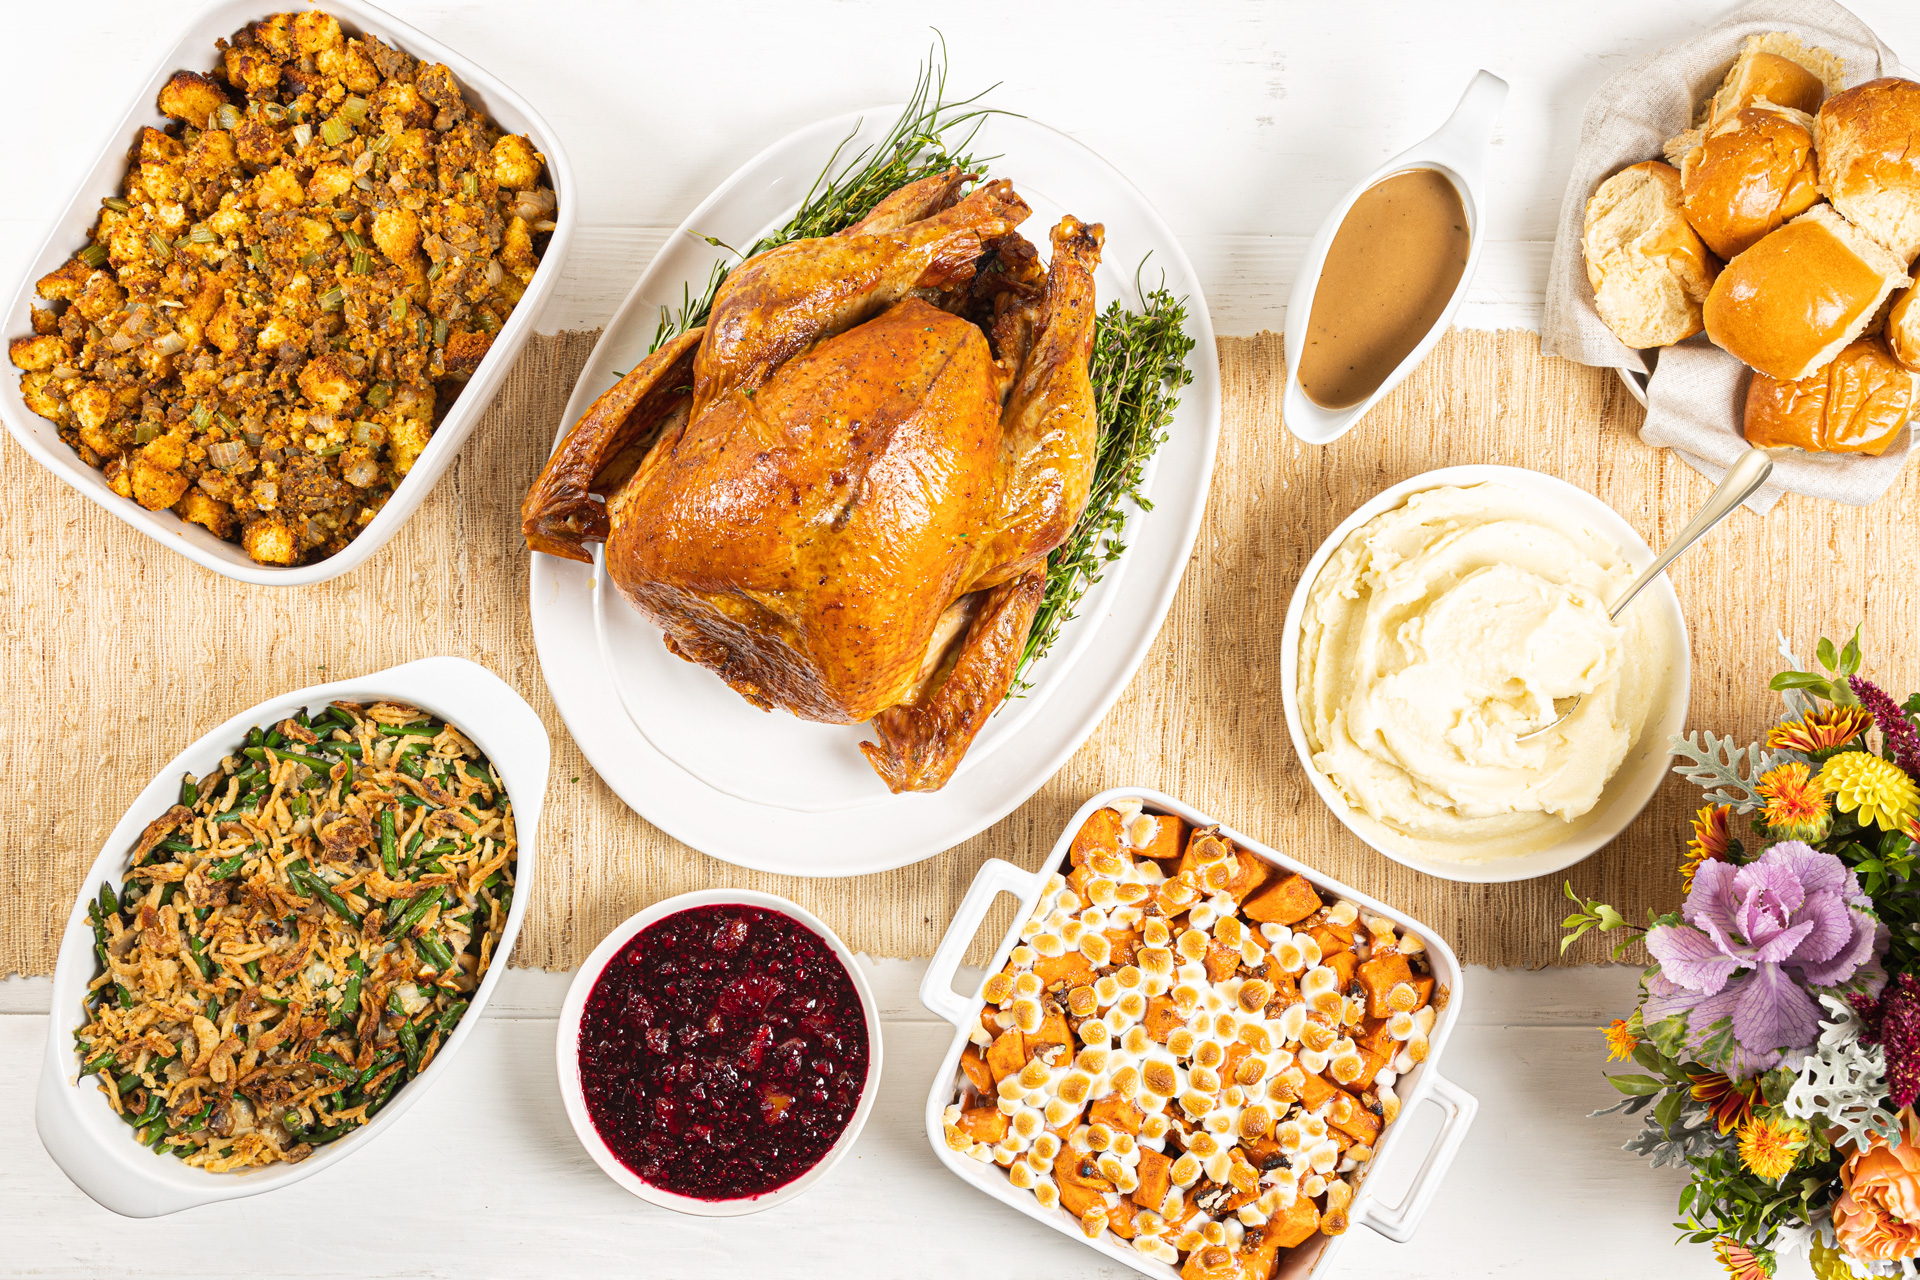 Holiday meal with roasted turkey, stuffing, mashed potatoes, green bean casserole, sweet potato casserole, rolls and cranberry sauce